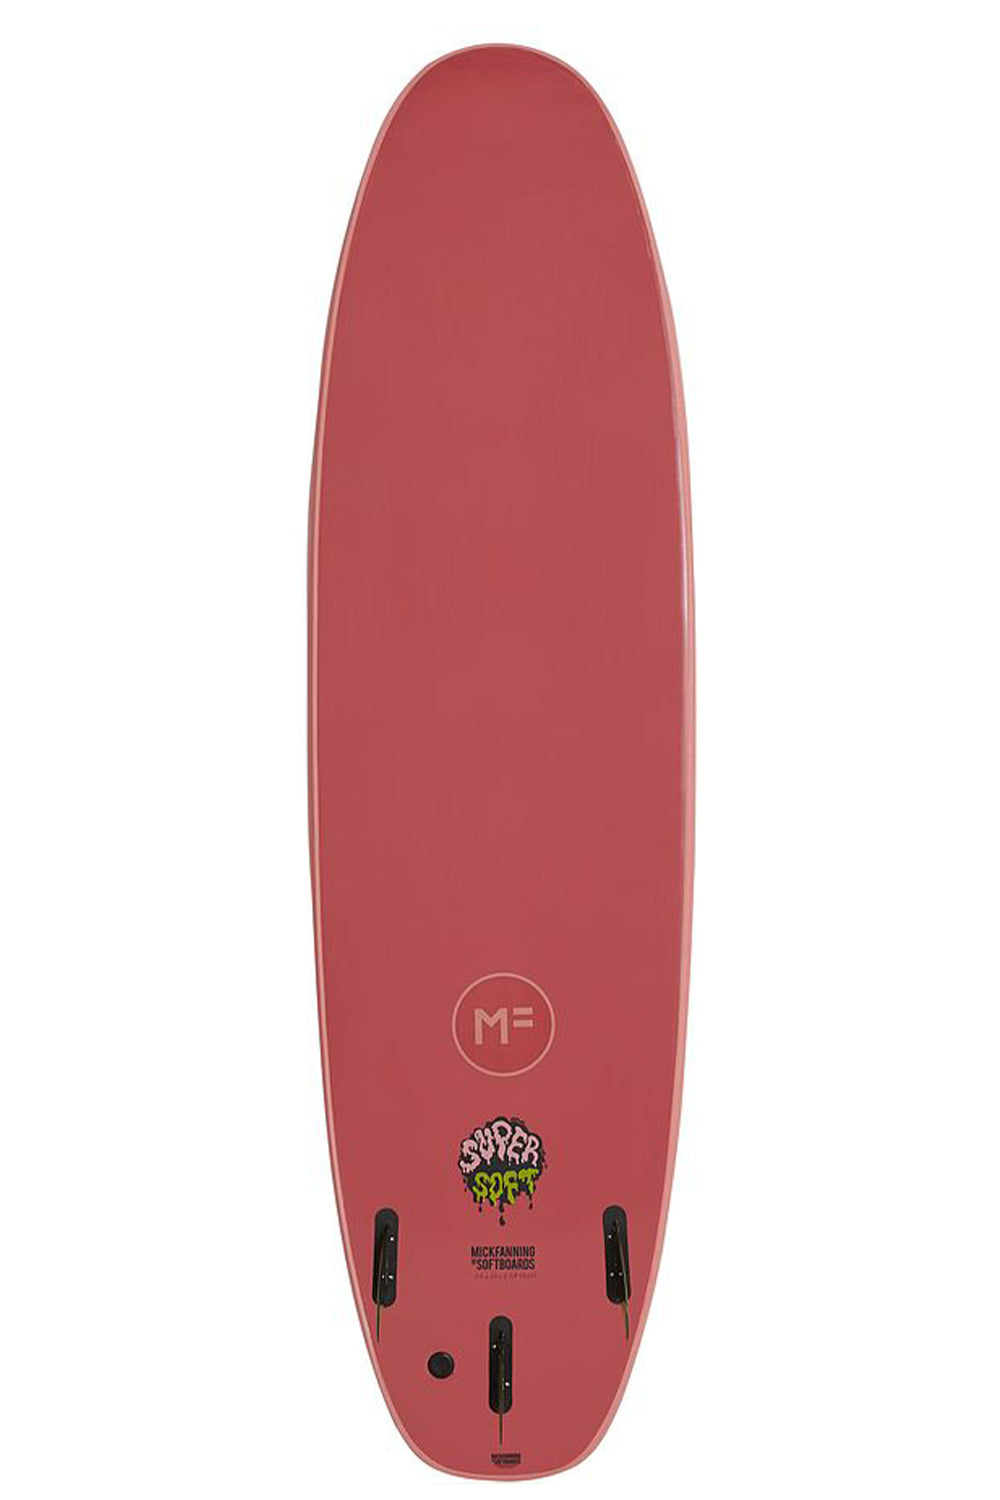 Mick Fanning MF Super Soft Beastie Softboard - Comes With Fins